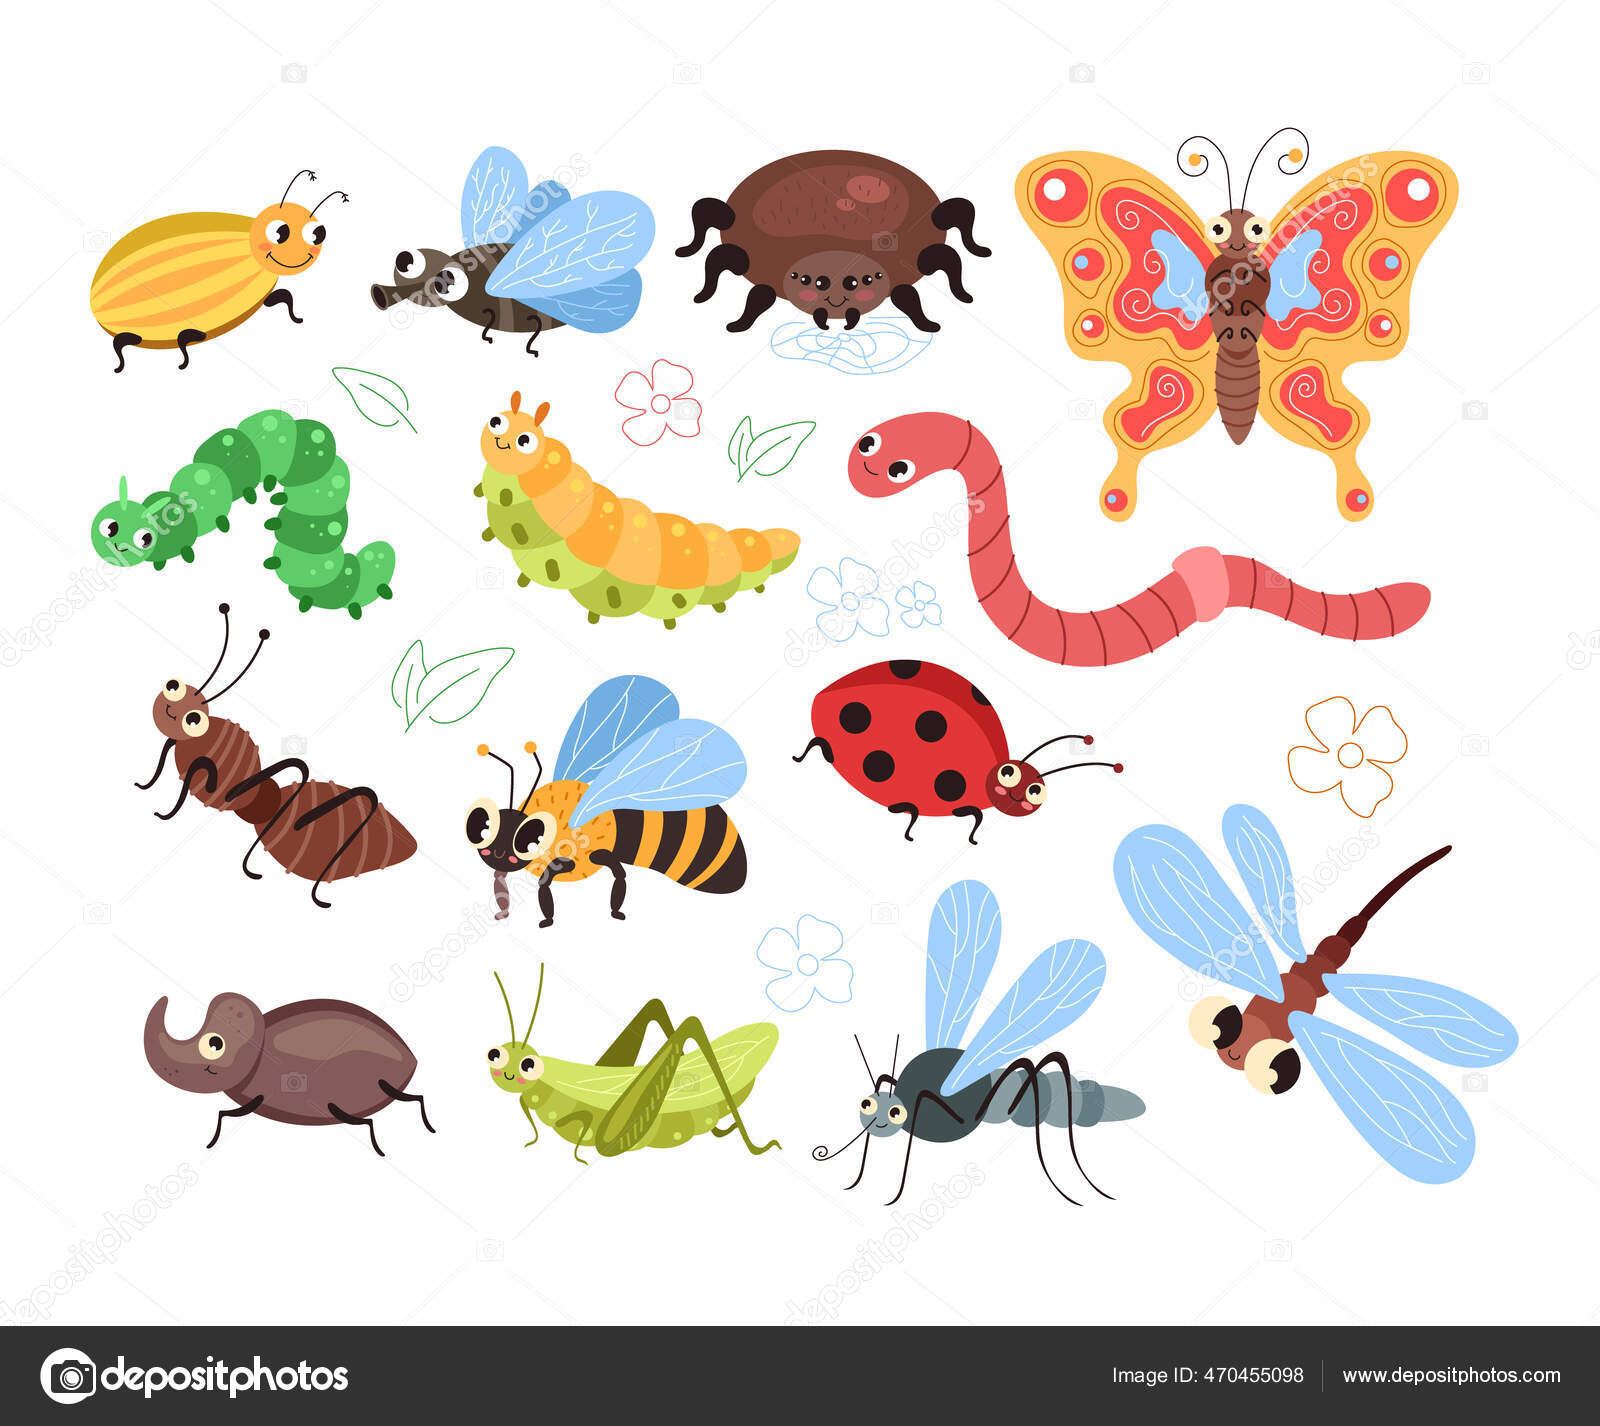 Beetles Insects Caterpillars Worm Ant Spider Butterfly Mosquito